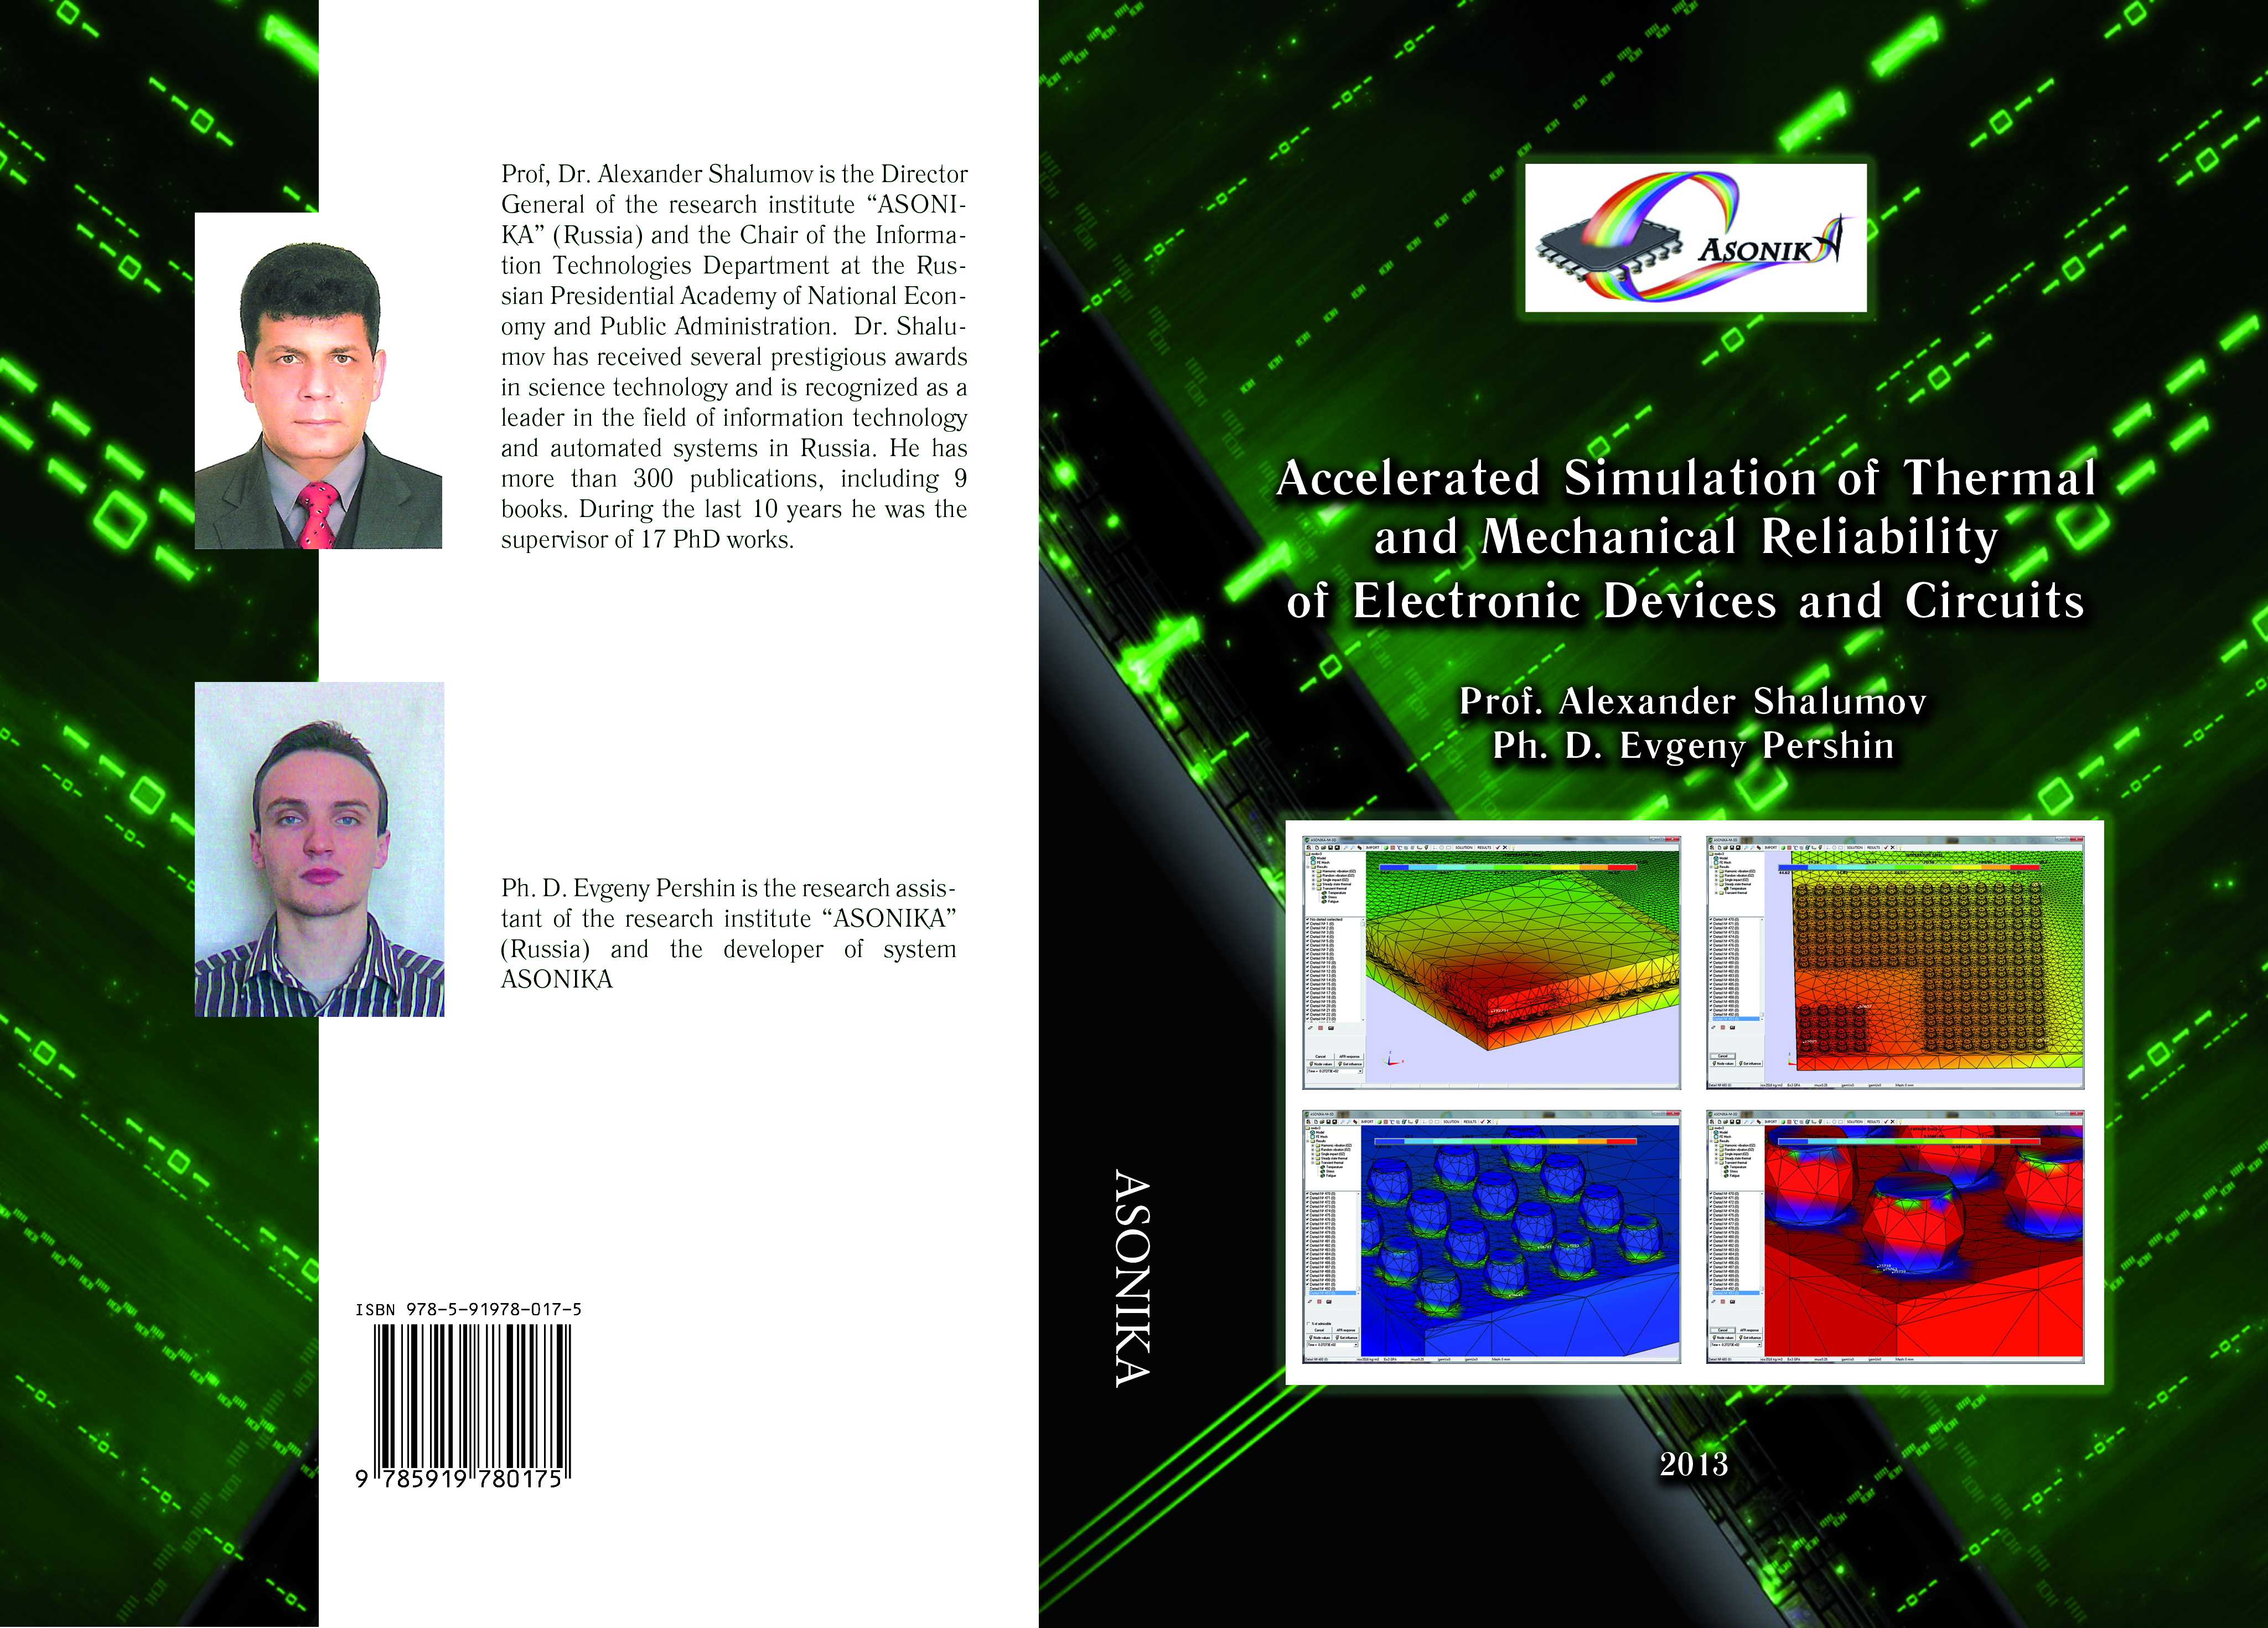 Accelerated Simulation of Thermal and Mechanical Reliability of Electronic Devices and Circuits